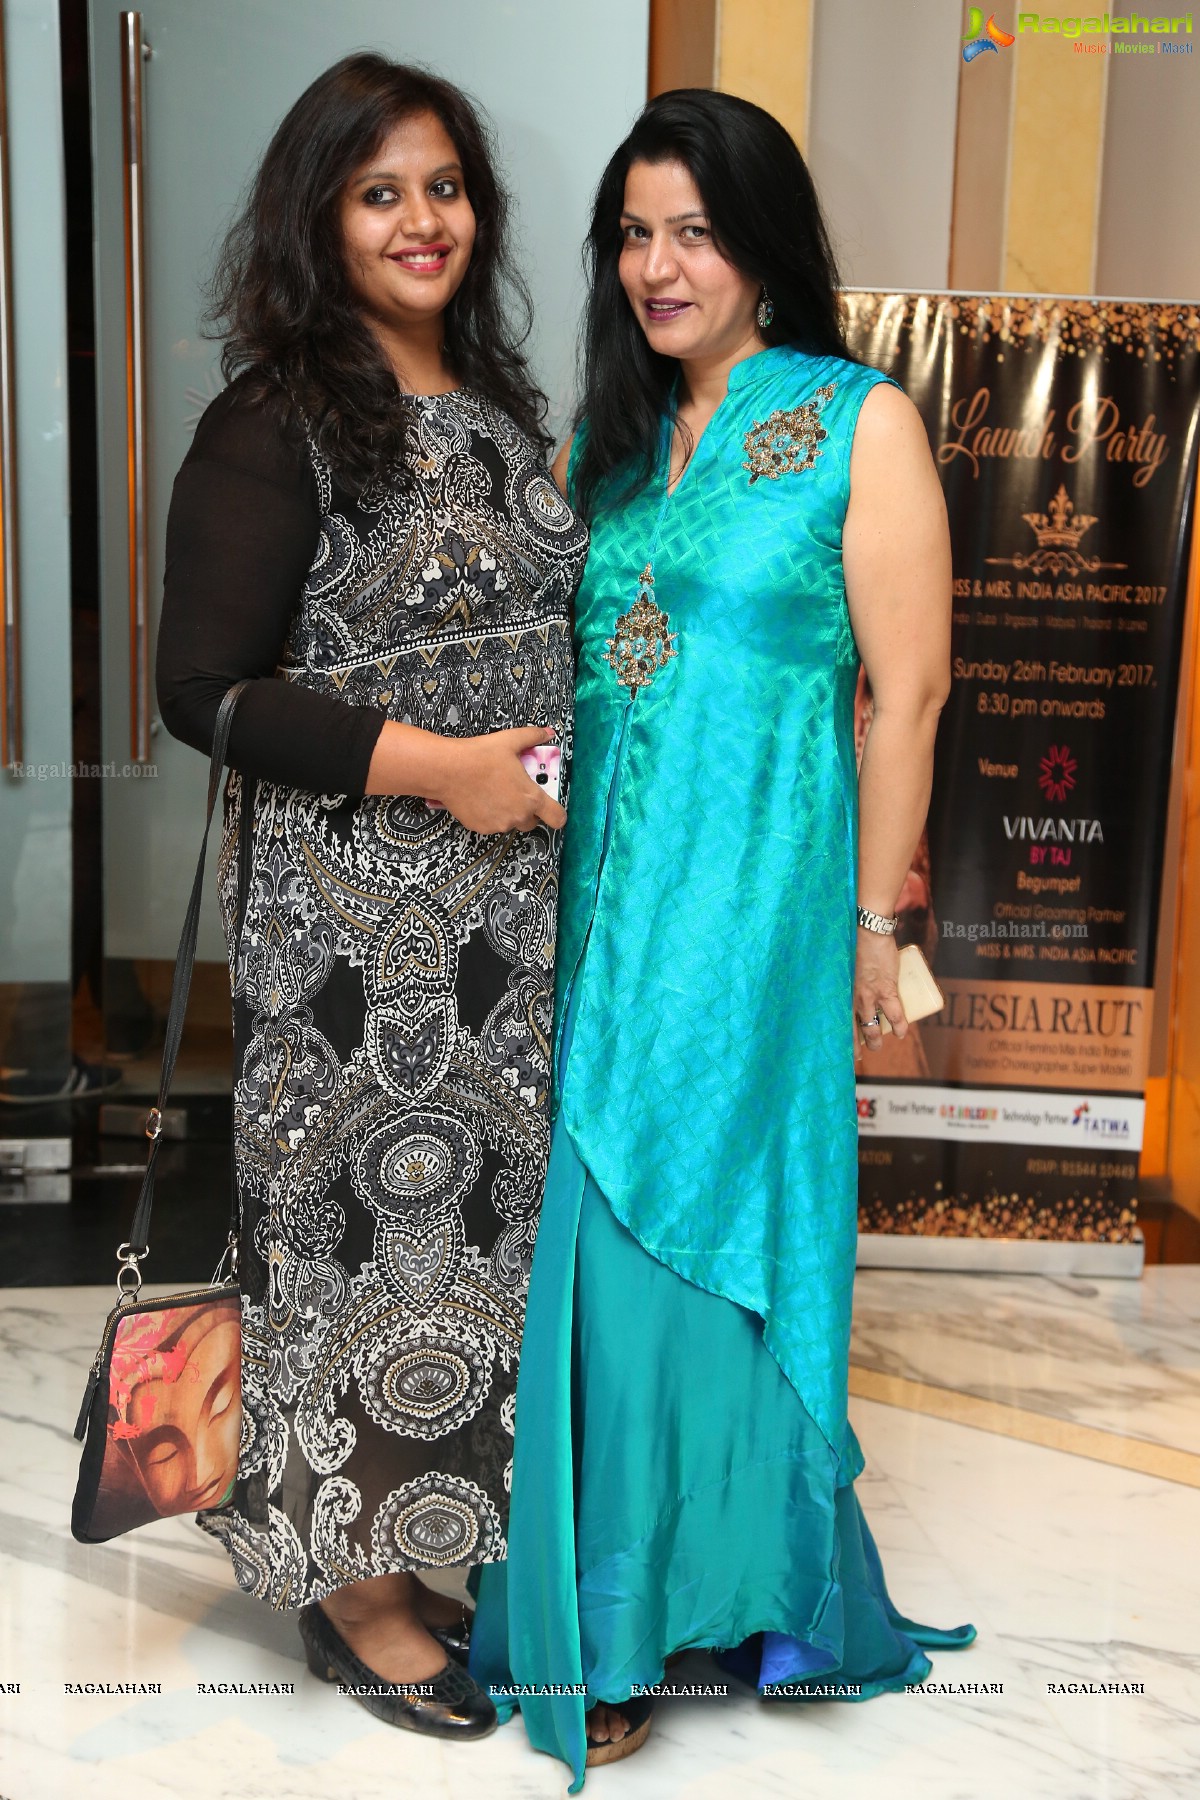 Grand Launch Party of Miss and Mrs. India Asia Pacific 2017 at Vivanta by Taj